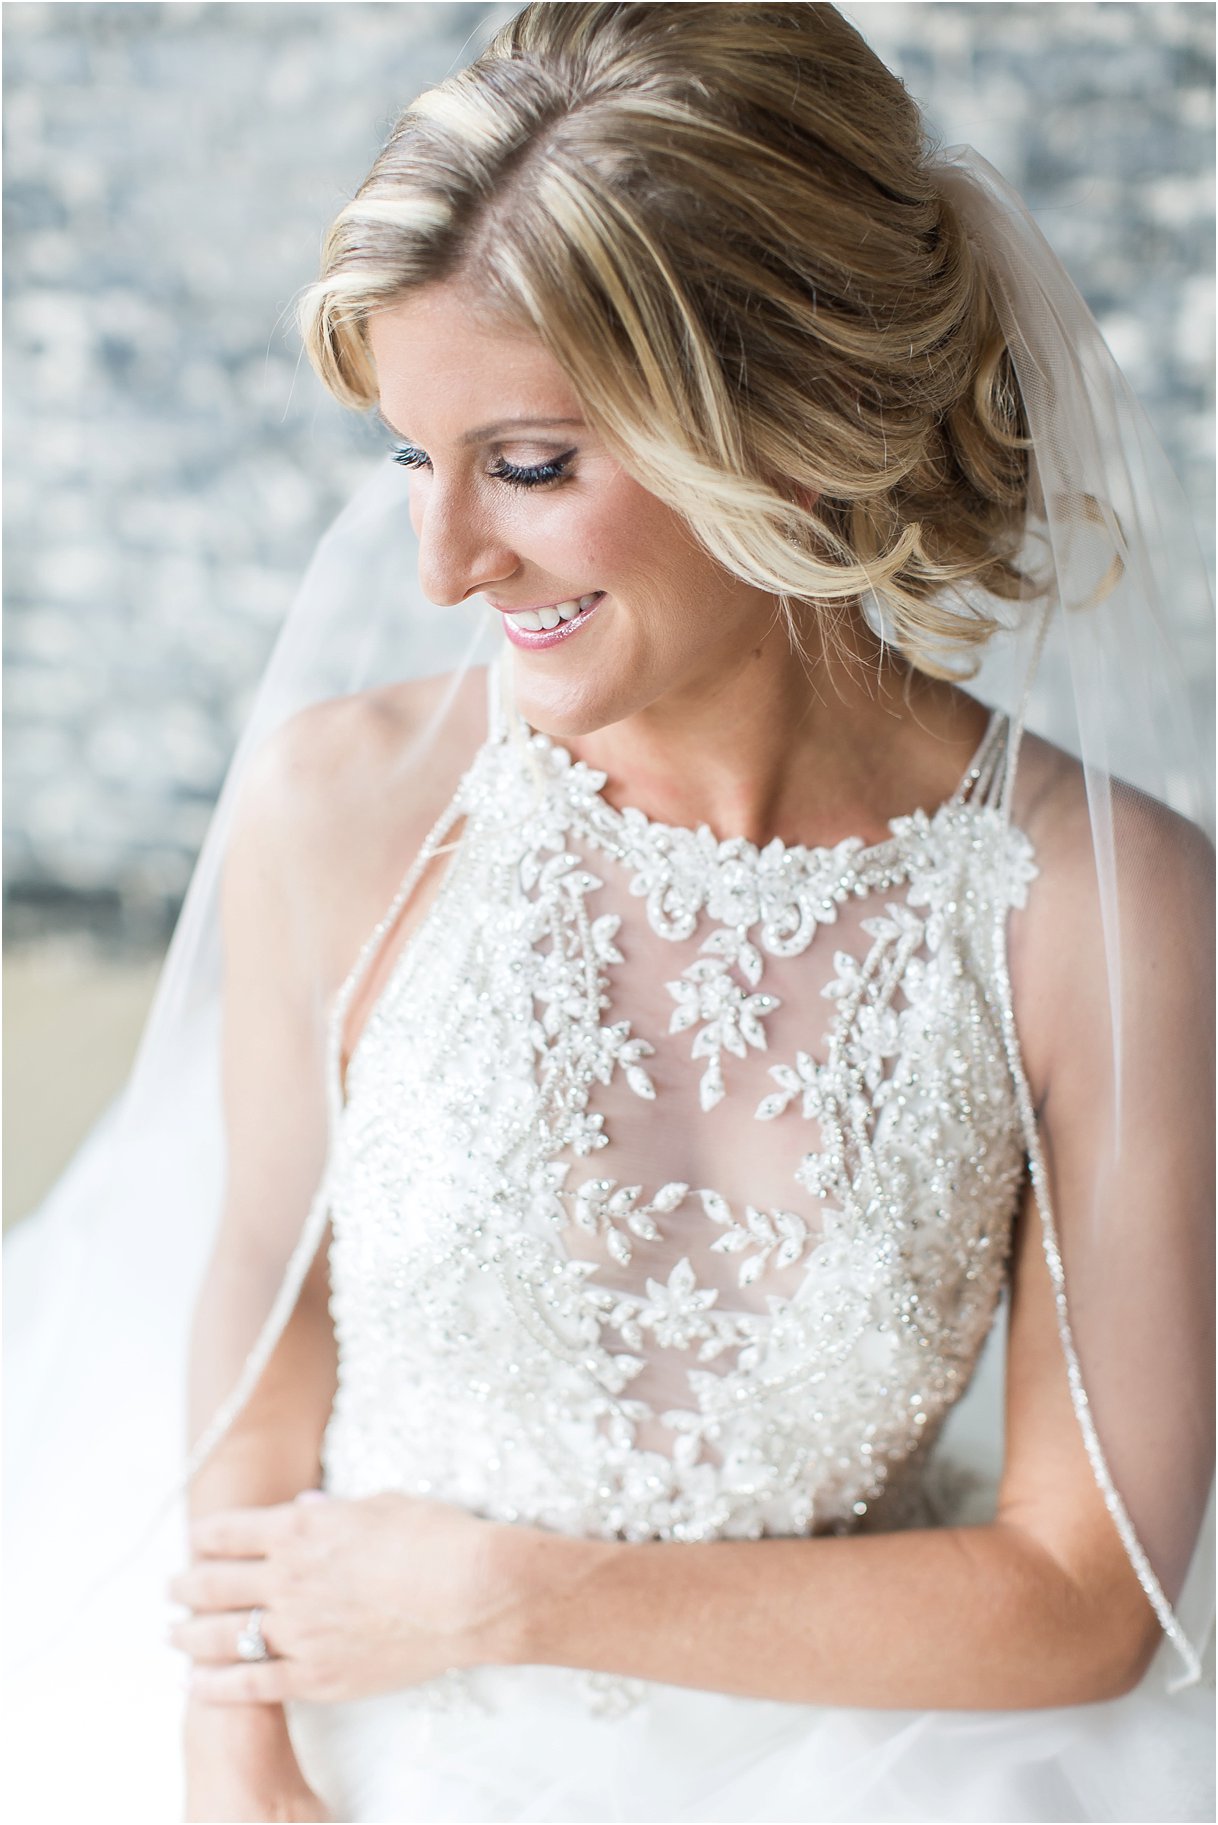 PSJ Photography-Gorgeous-Bride-Oxford-Exchange-Wedding-Tampa-Maggie-Sottero-Wedding-Gown-Lace 